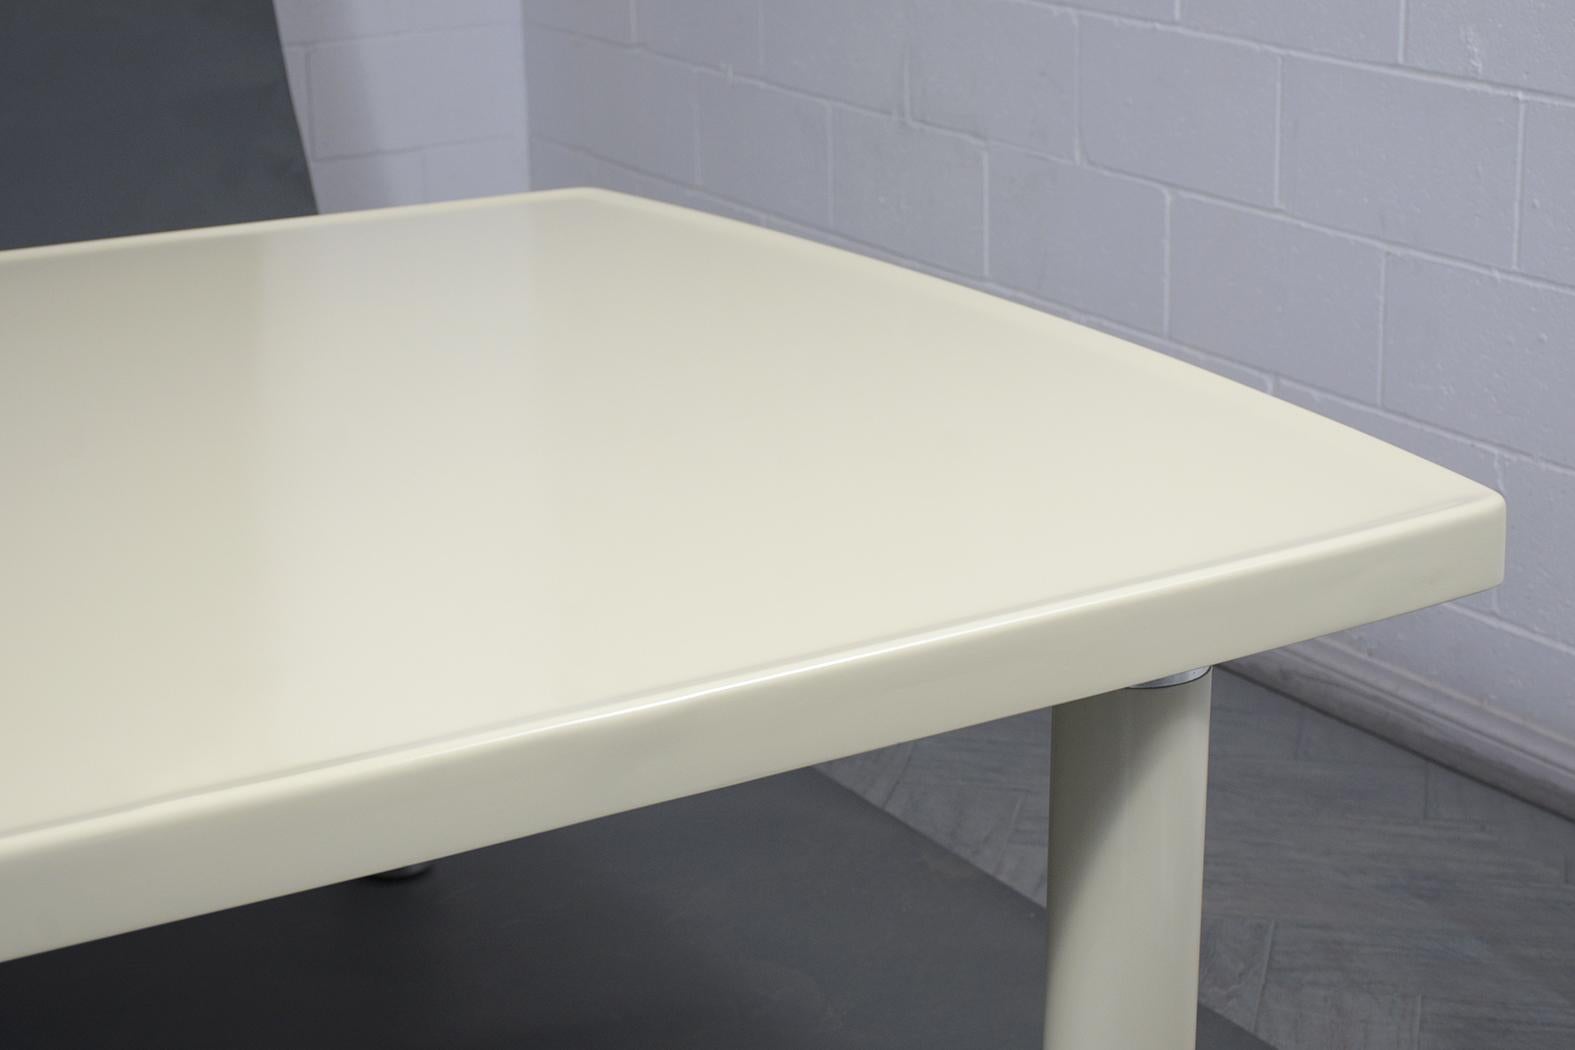 Stained Stewart MacDougall Ivory Cream Dining Table with Silvered Leg Details For Sale